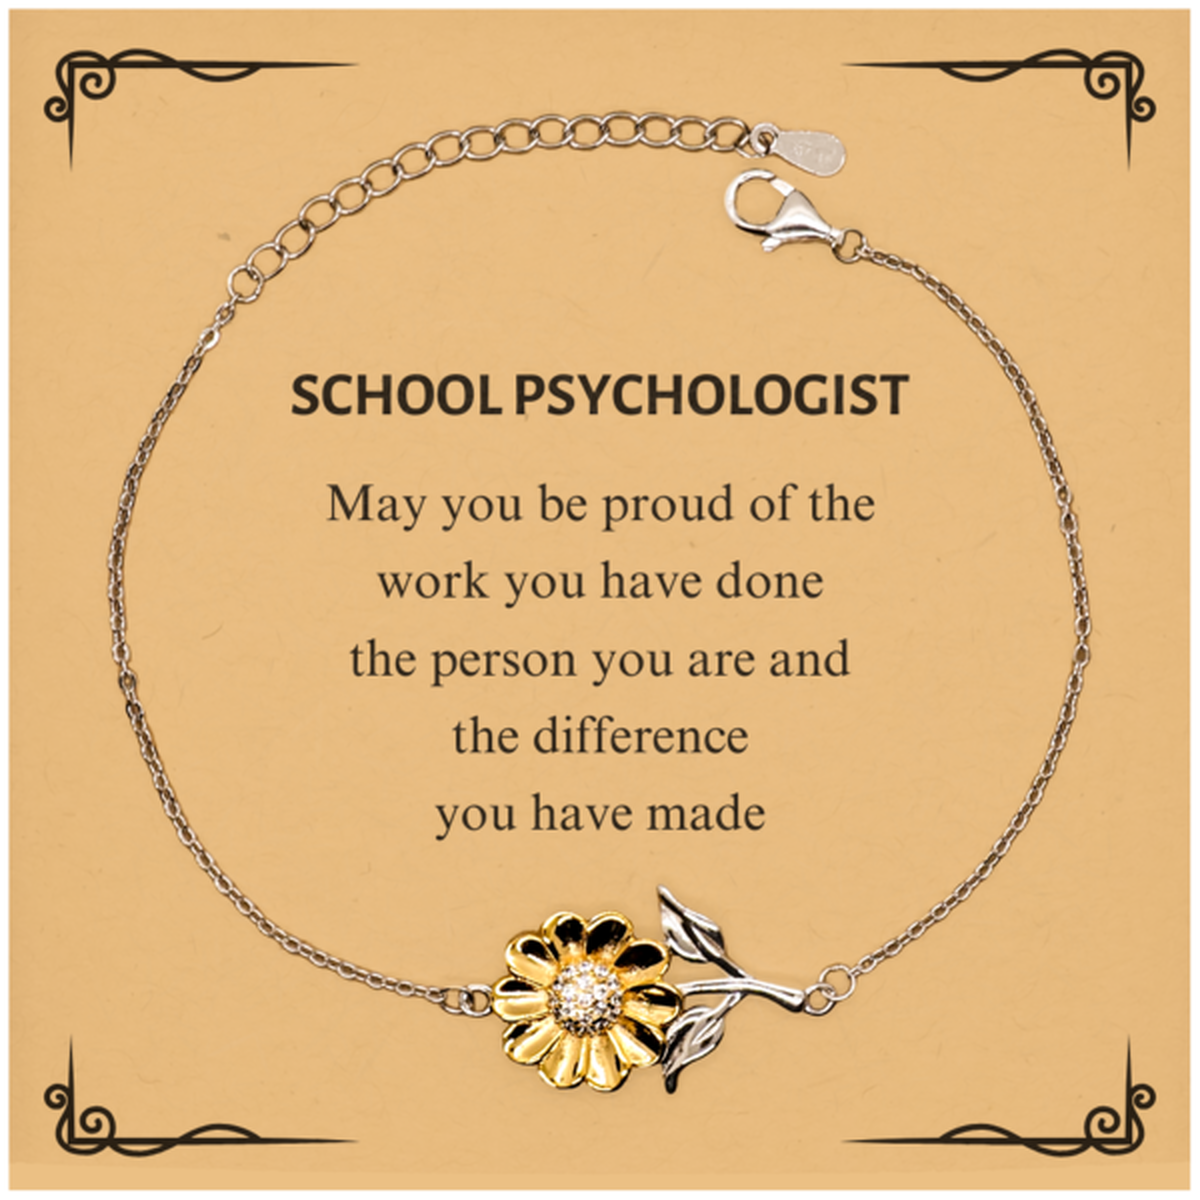 School Psychologist May you be proud of the work you have done, Retirement School Psychologist Sunflower Bracelet for Colleague Appreciation Gifts Amazing for School Psychologist